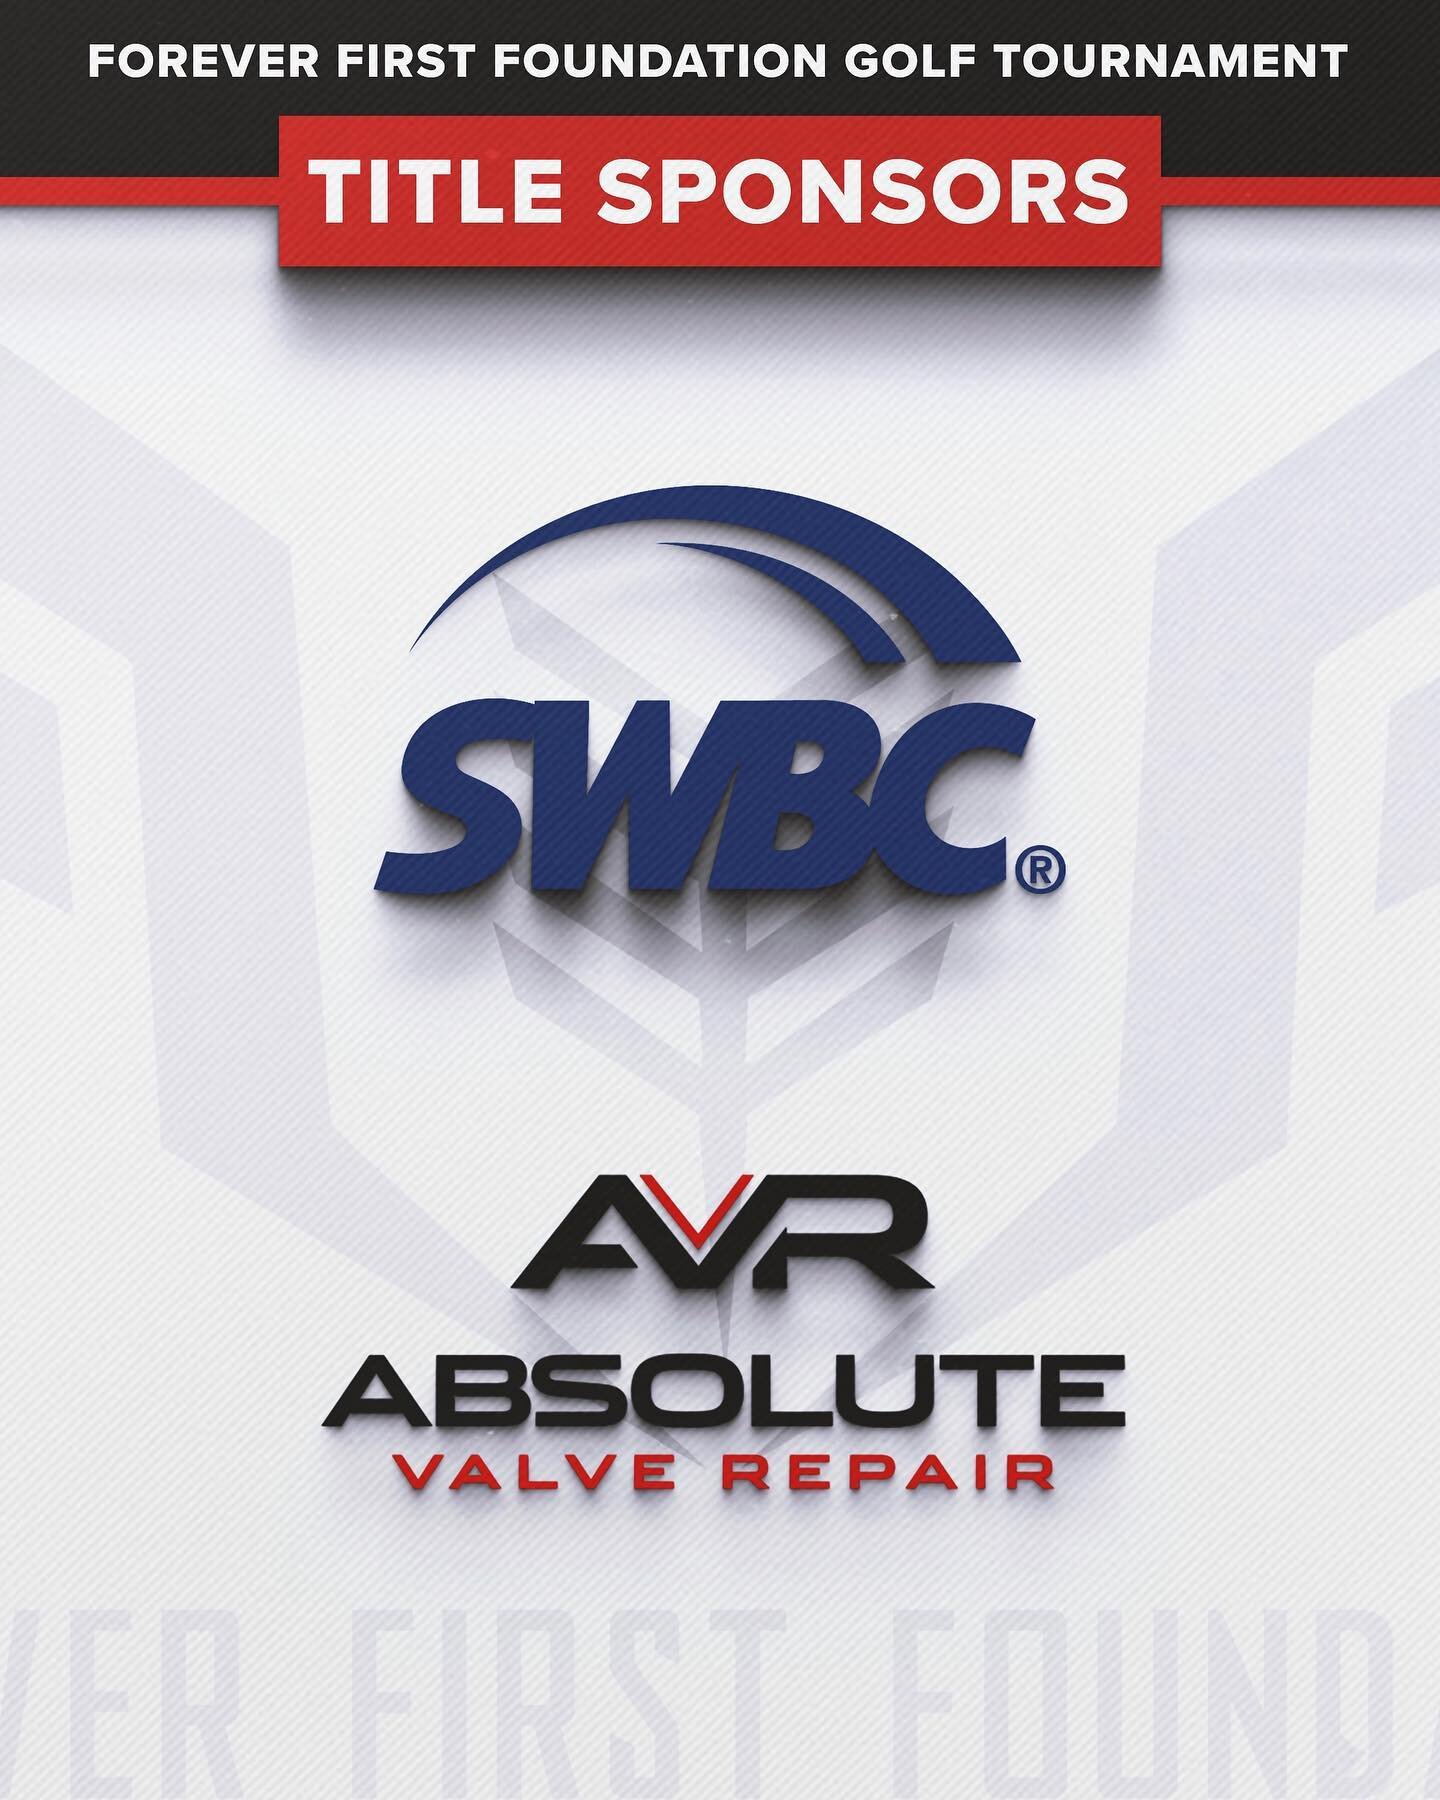 We would like to give a big shoutout to our two Title Sponsors for our 11th Annual Forever First Foundation Golf Tournament, SWBC and Absolute Valve Repair! Thank you so much for your generosity and willingness to help support UIW Football. 

We stil